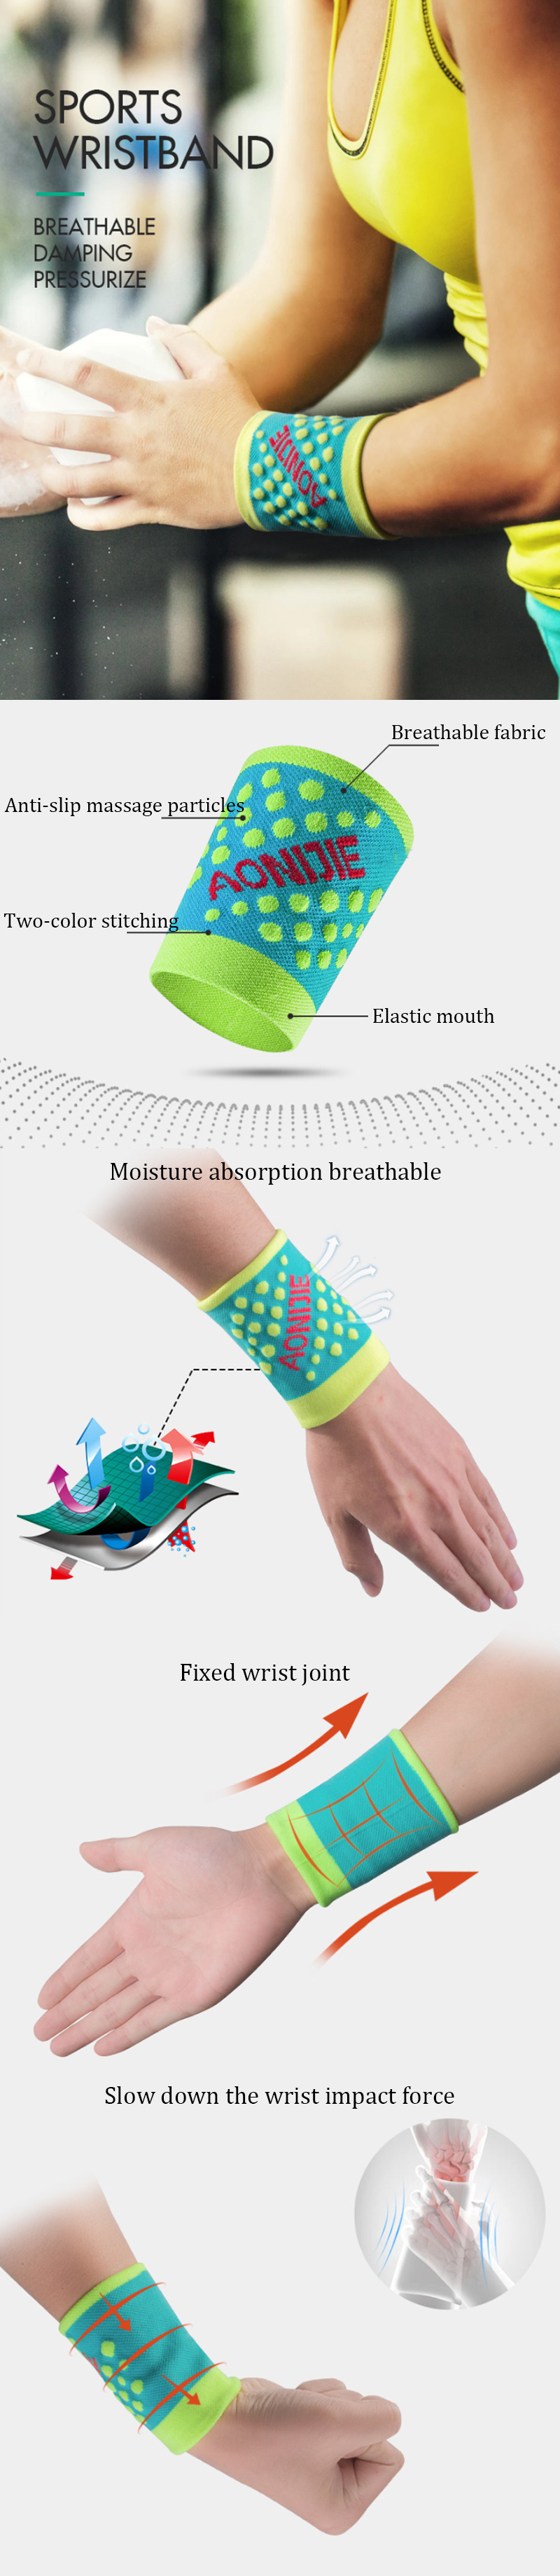 AONIJIE-1-Pair-Wristband-Fitness-Exercise-Running-Sports-Elastic-Wrist-Support-Brace-Sweatband-1404406-1